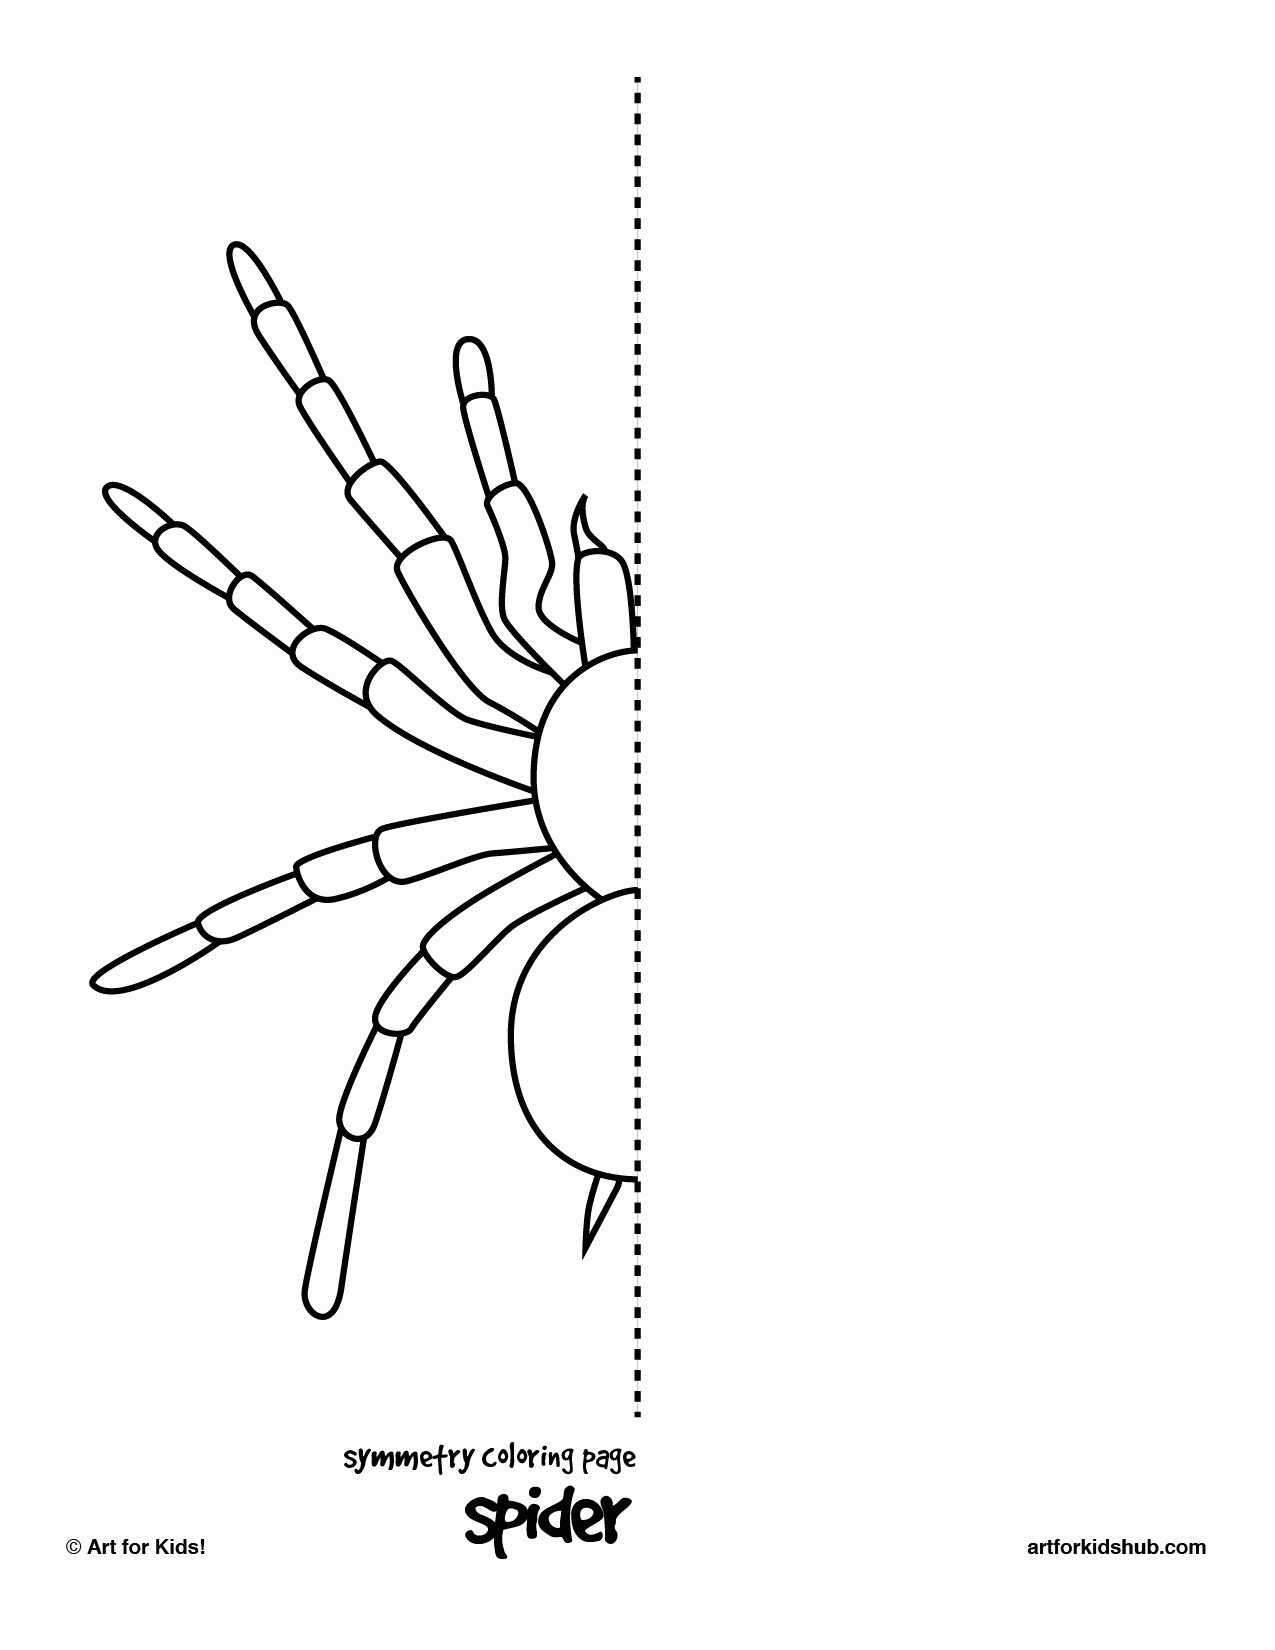 Spider Worksheets For First Graders - The Largest and Most ...